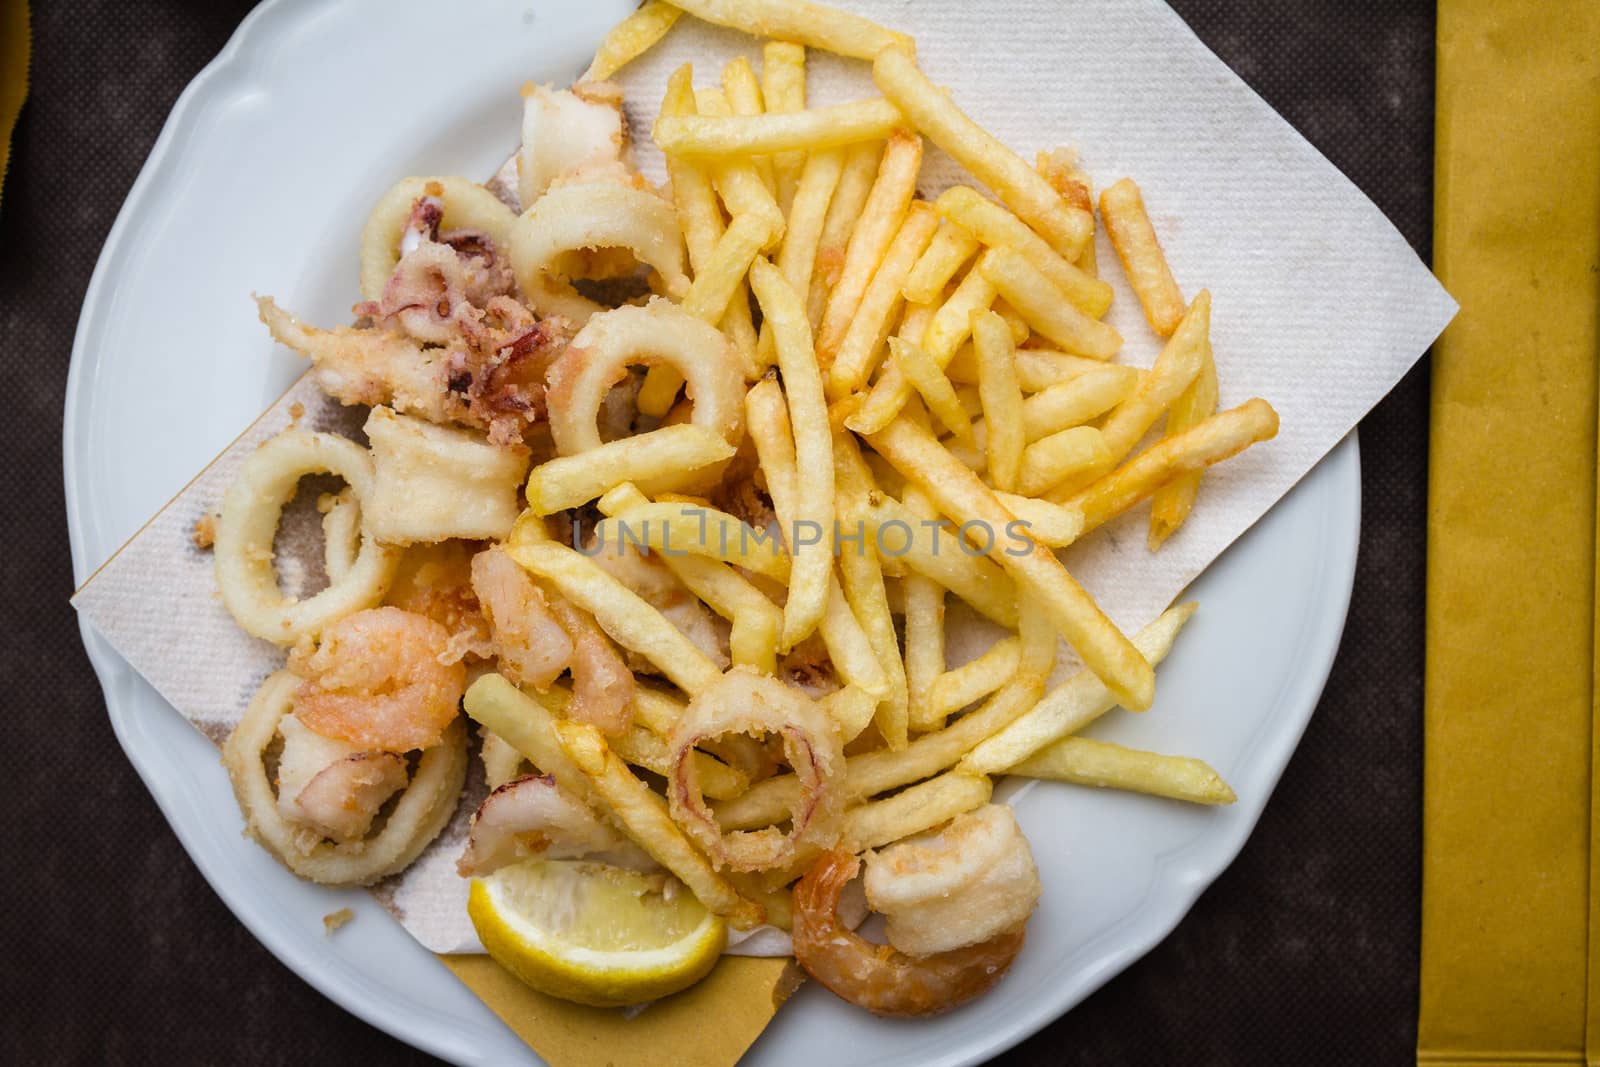 mixed fried fish, with squid, blue fish, chips and lemon